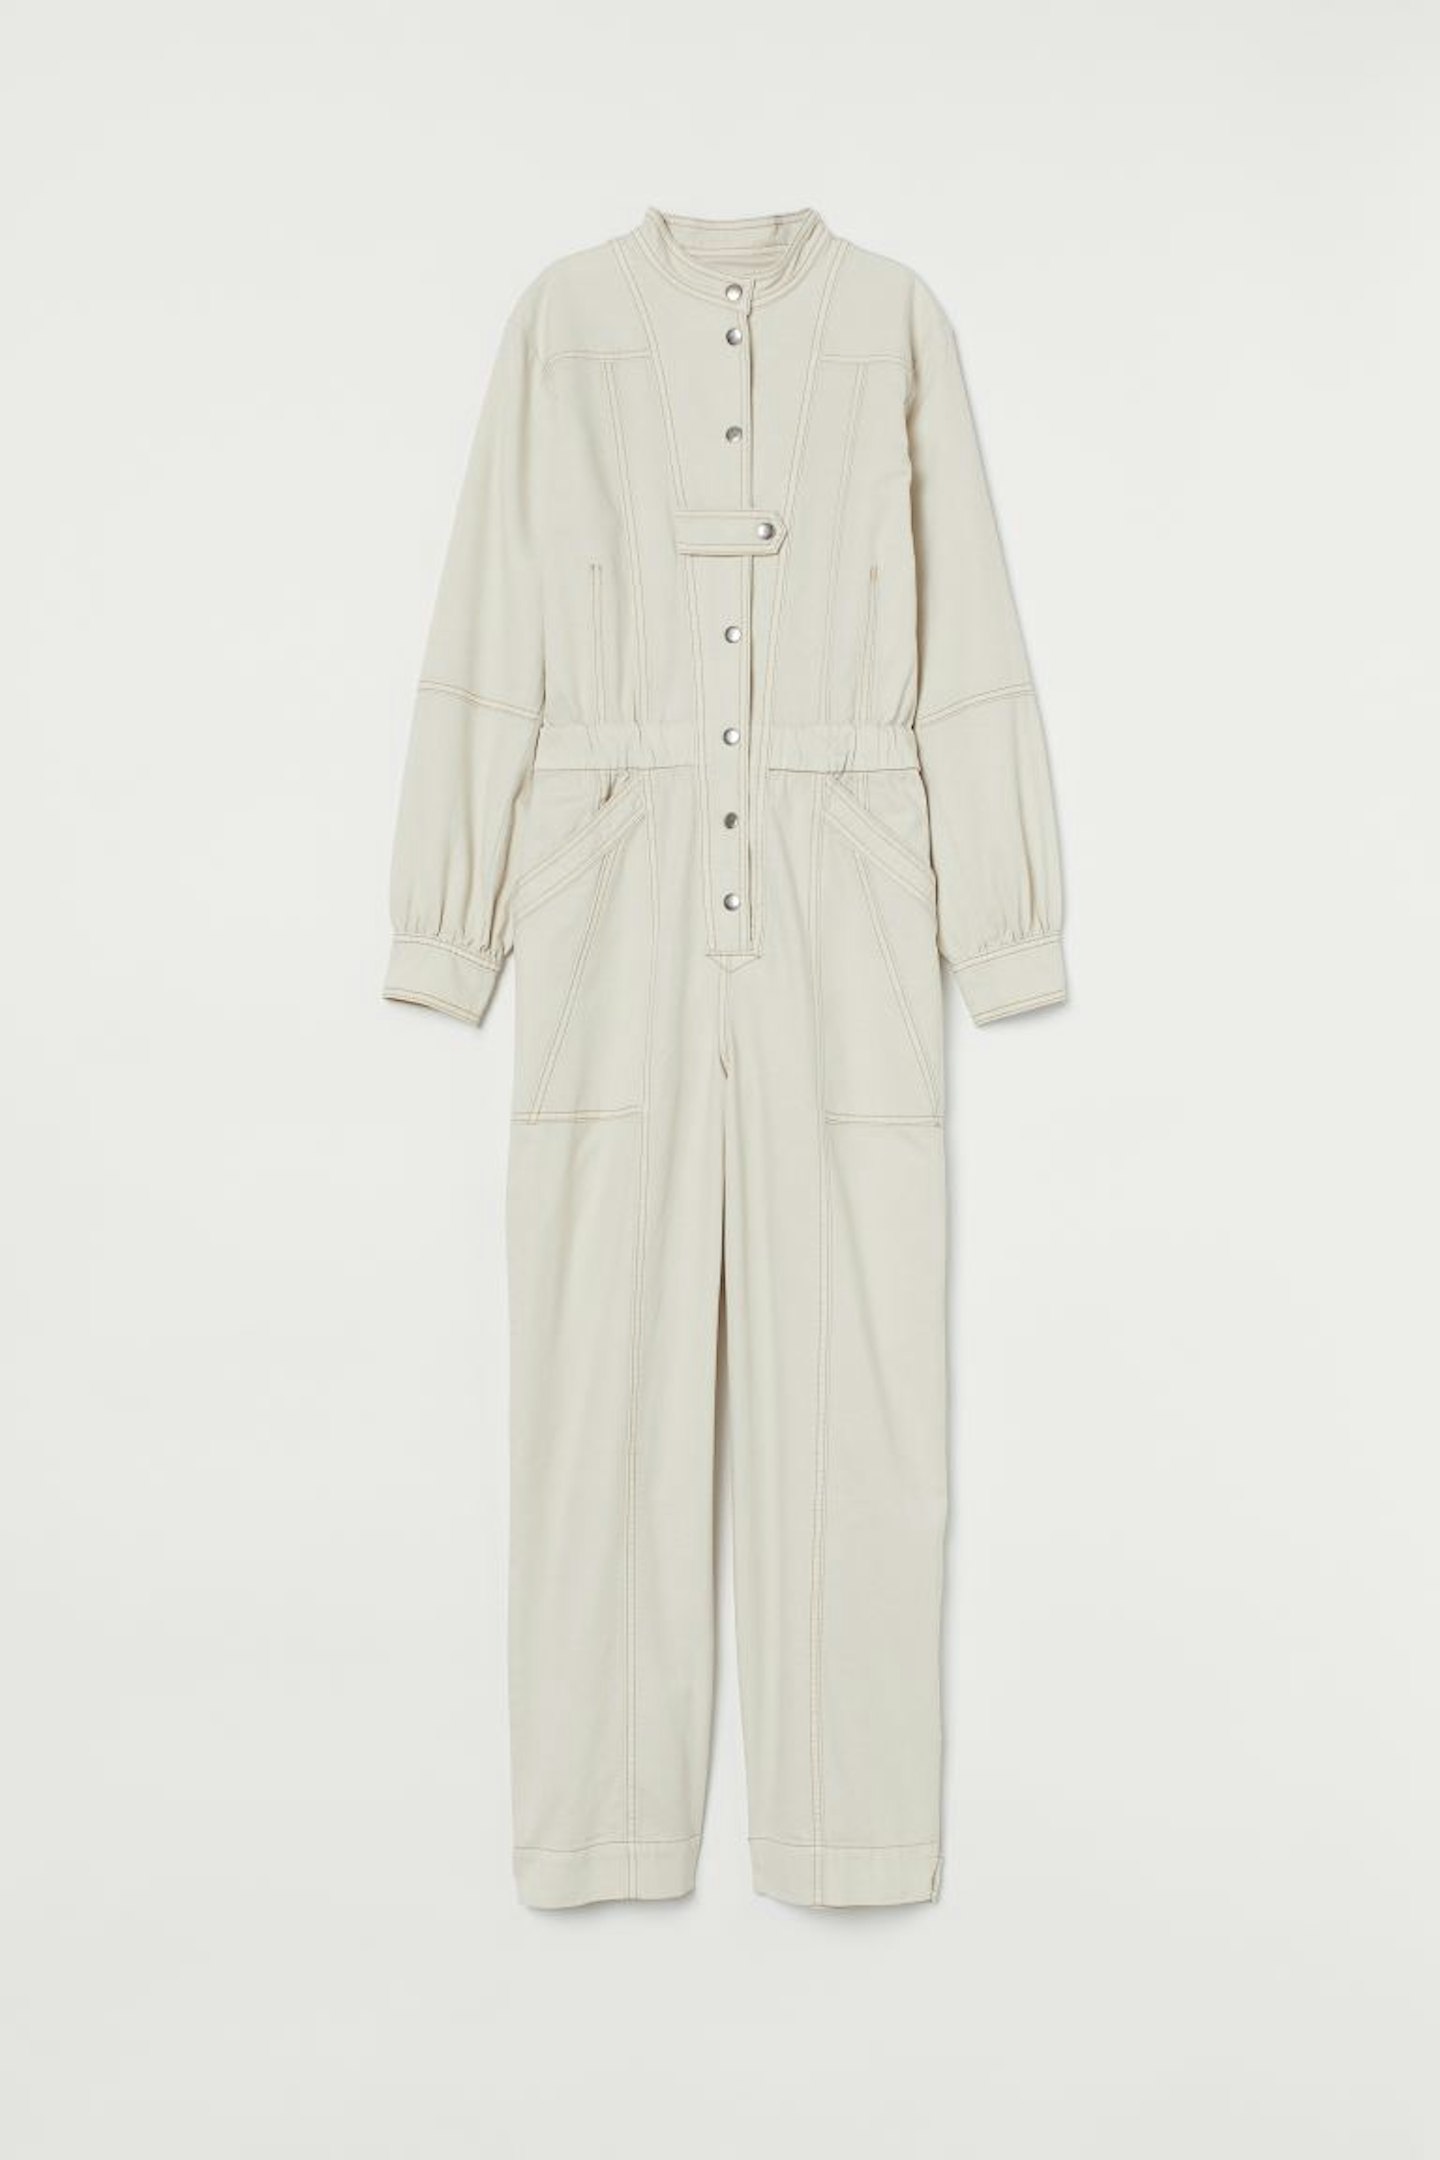 H&M, Twill Boilersuit, WAS £59.99, NOW £36